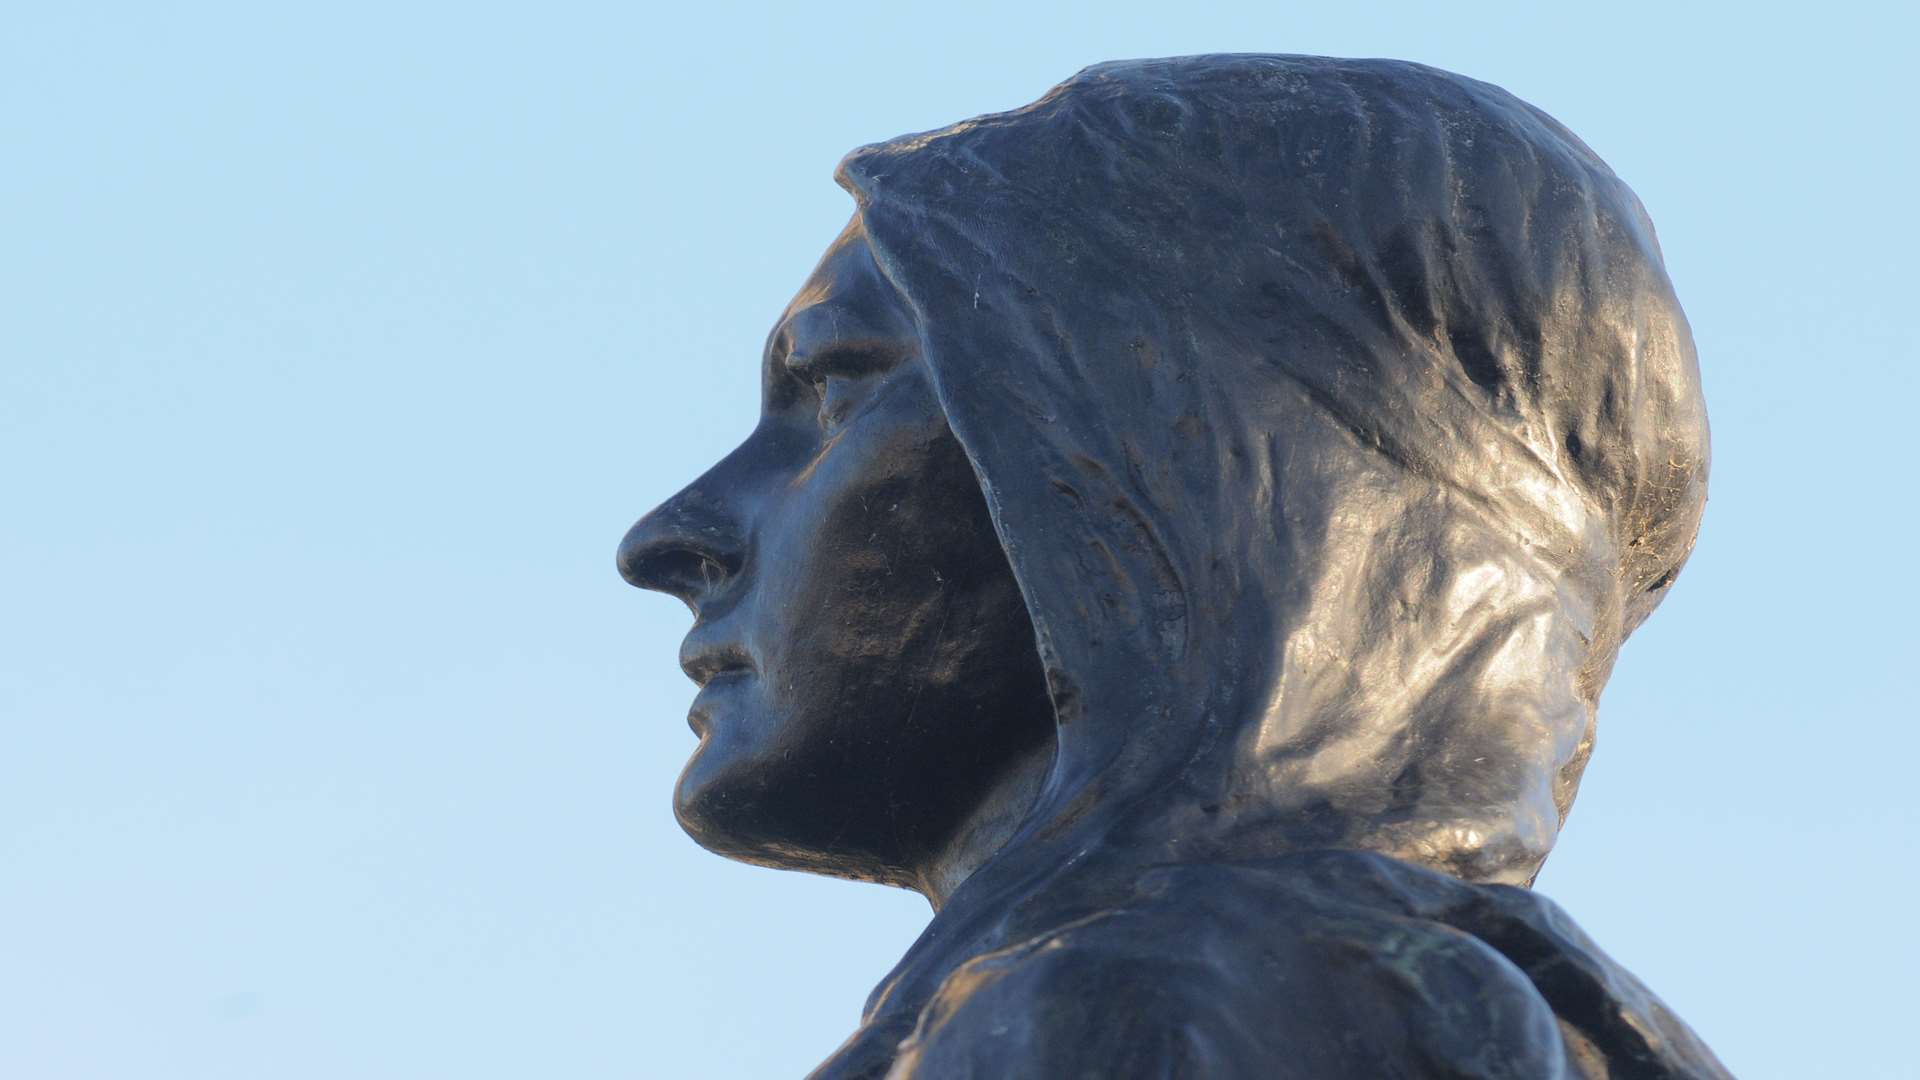 The feather-less Pocahontas statue in Gravesend